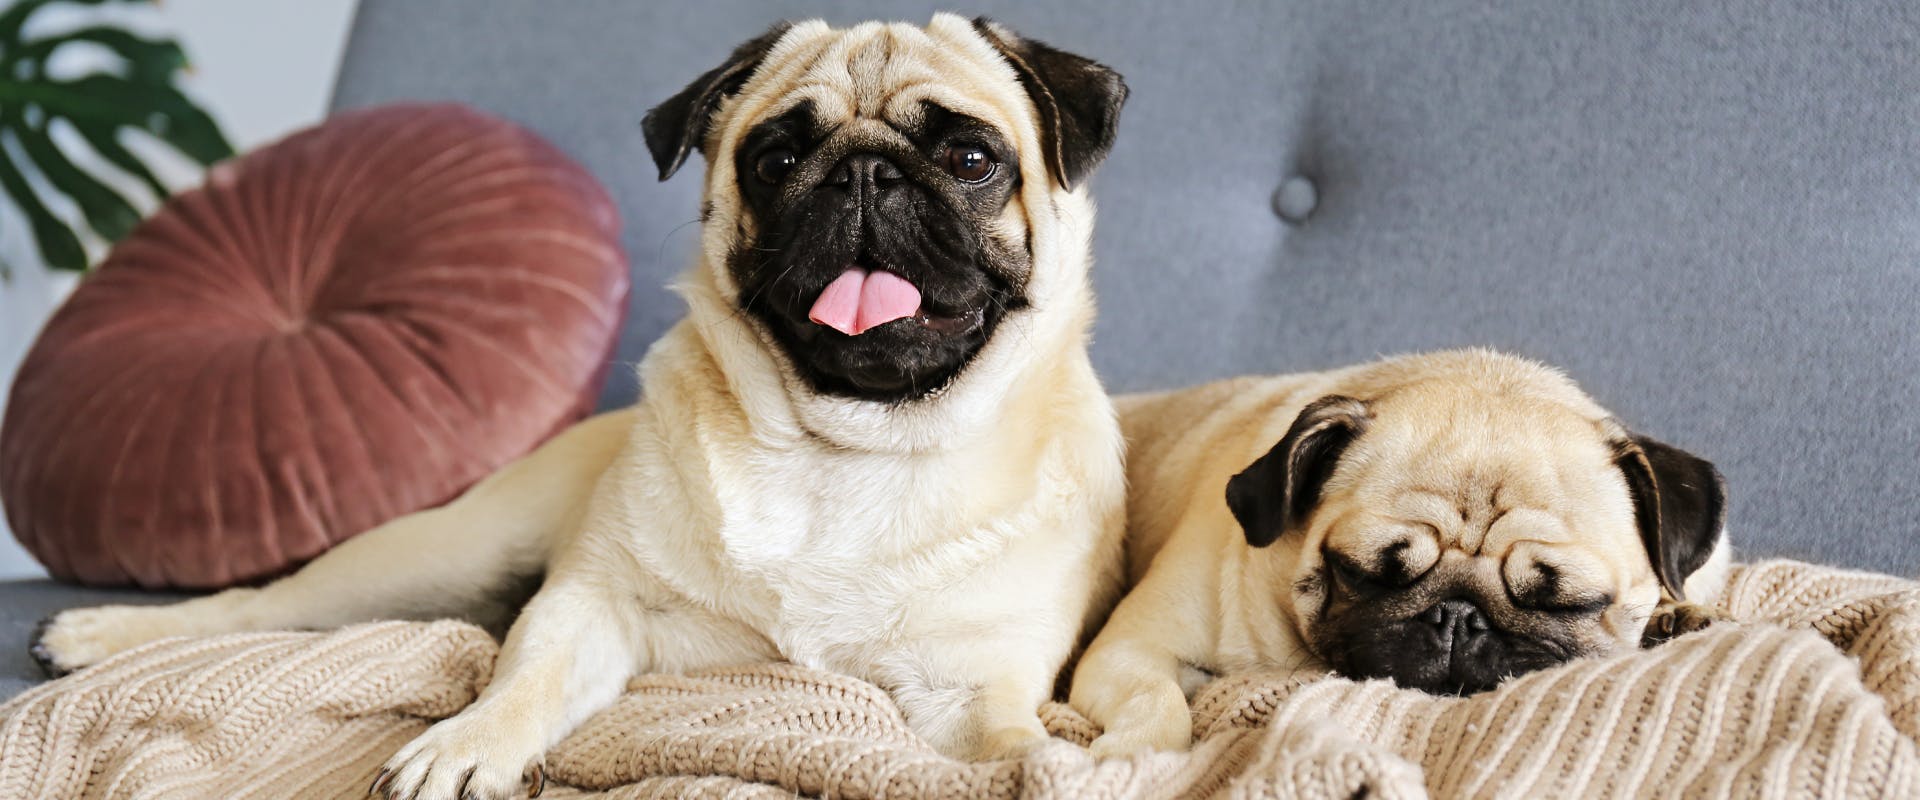 two pugs lying on a blanket where on pug is asleep and the other pug is awake